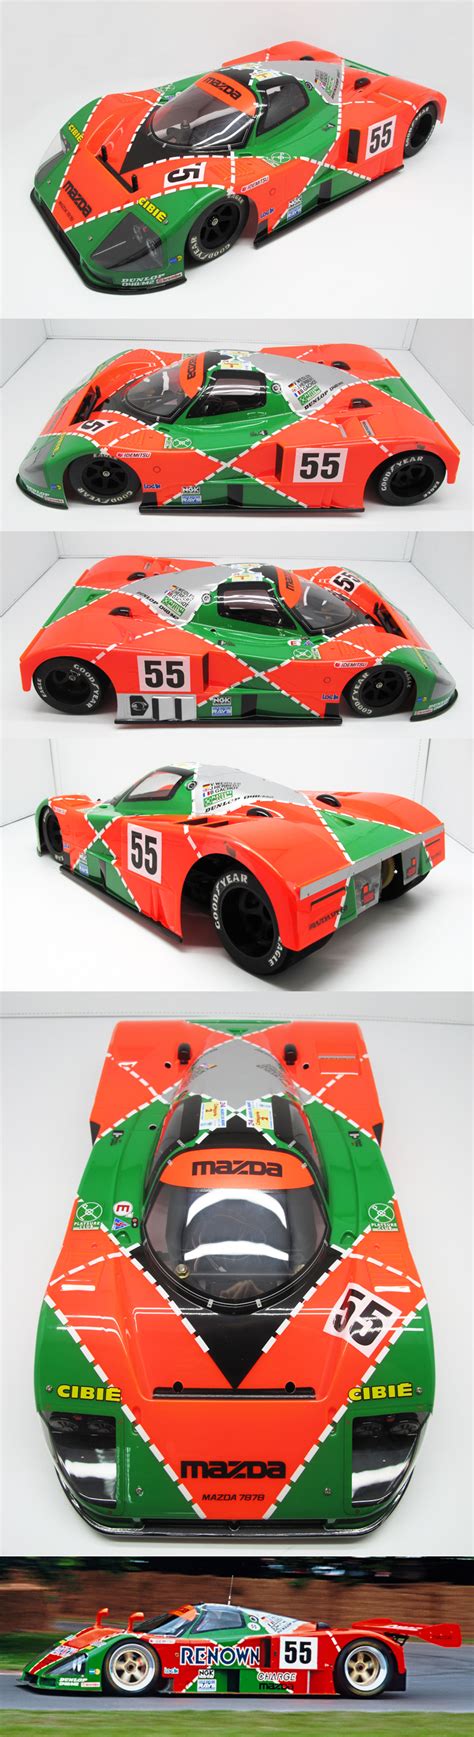 110 Mazda 787b 1991 Le Mans Decal Sticker Logo For Tamiya Chassis Tt01